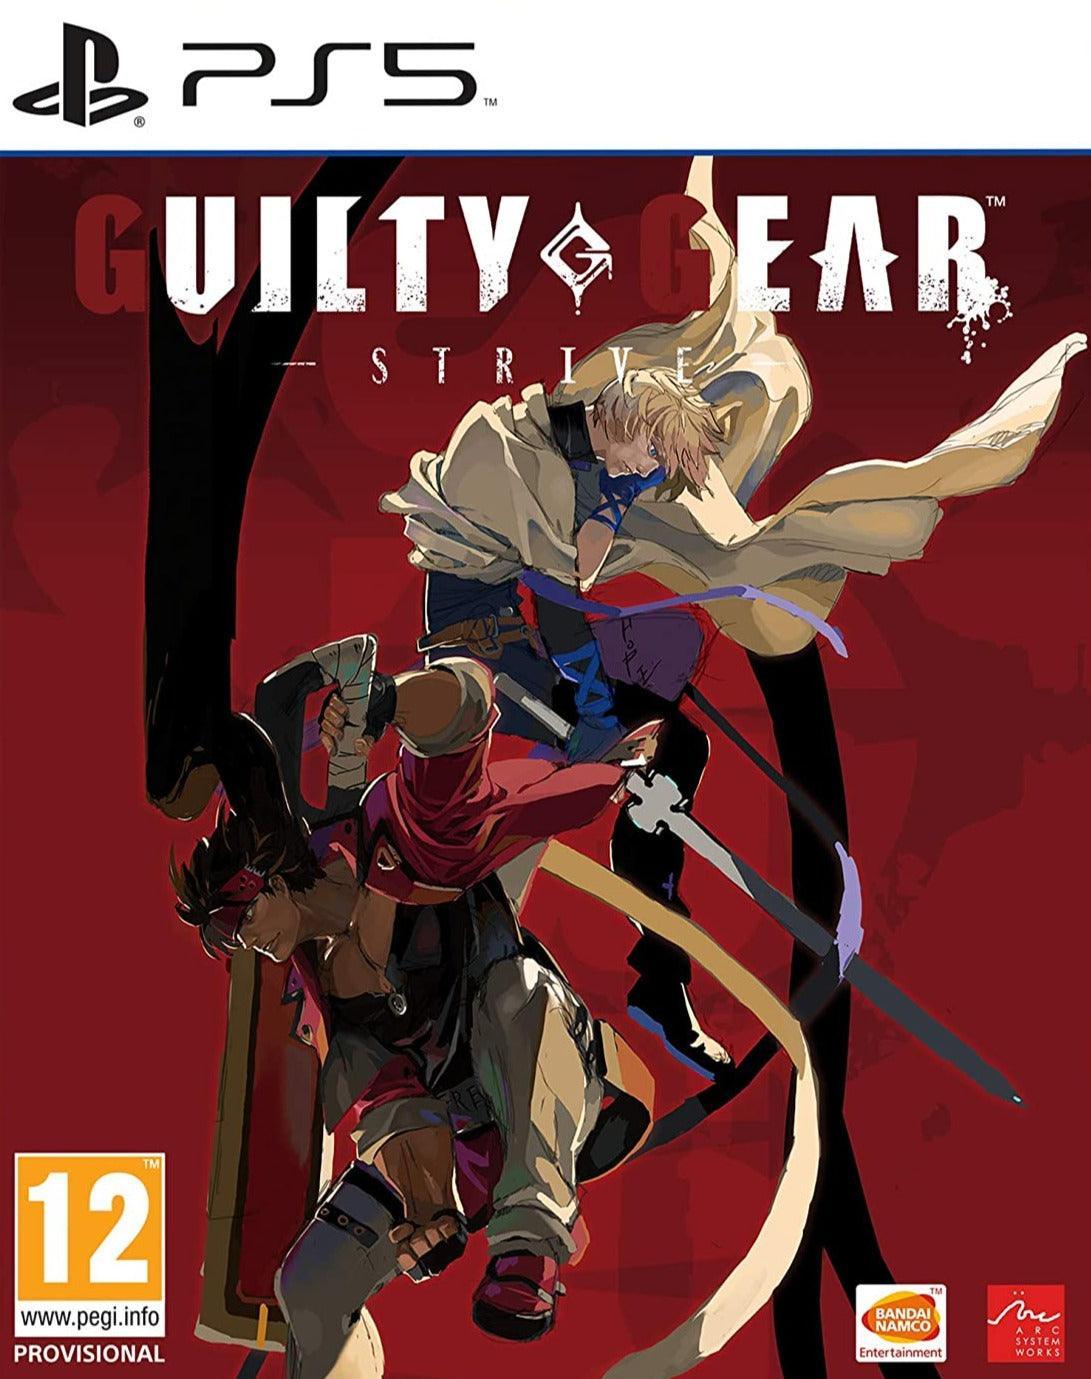 Guilty Gears Strive - Playstation 5 - GD Games 